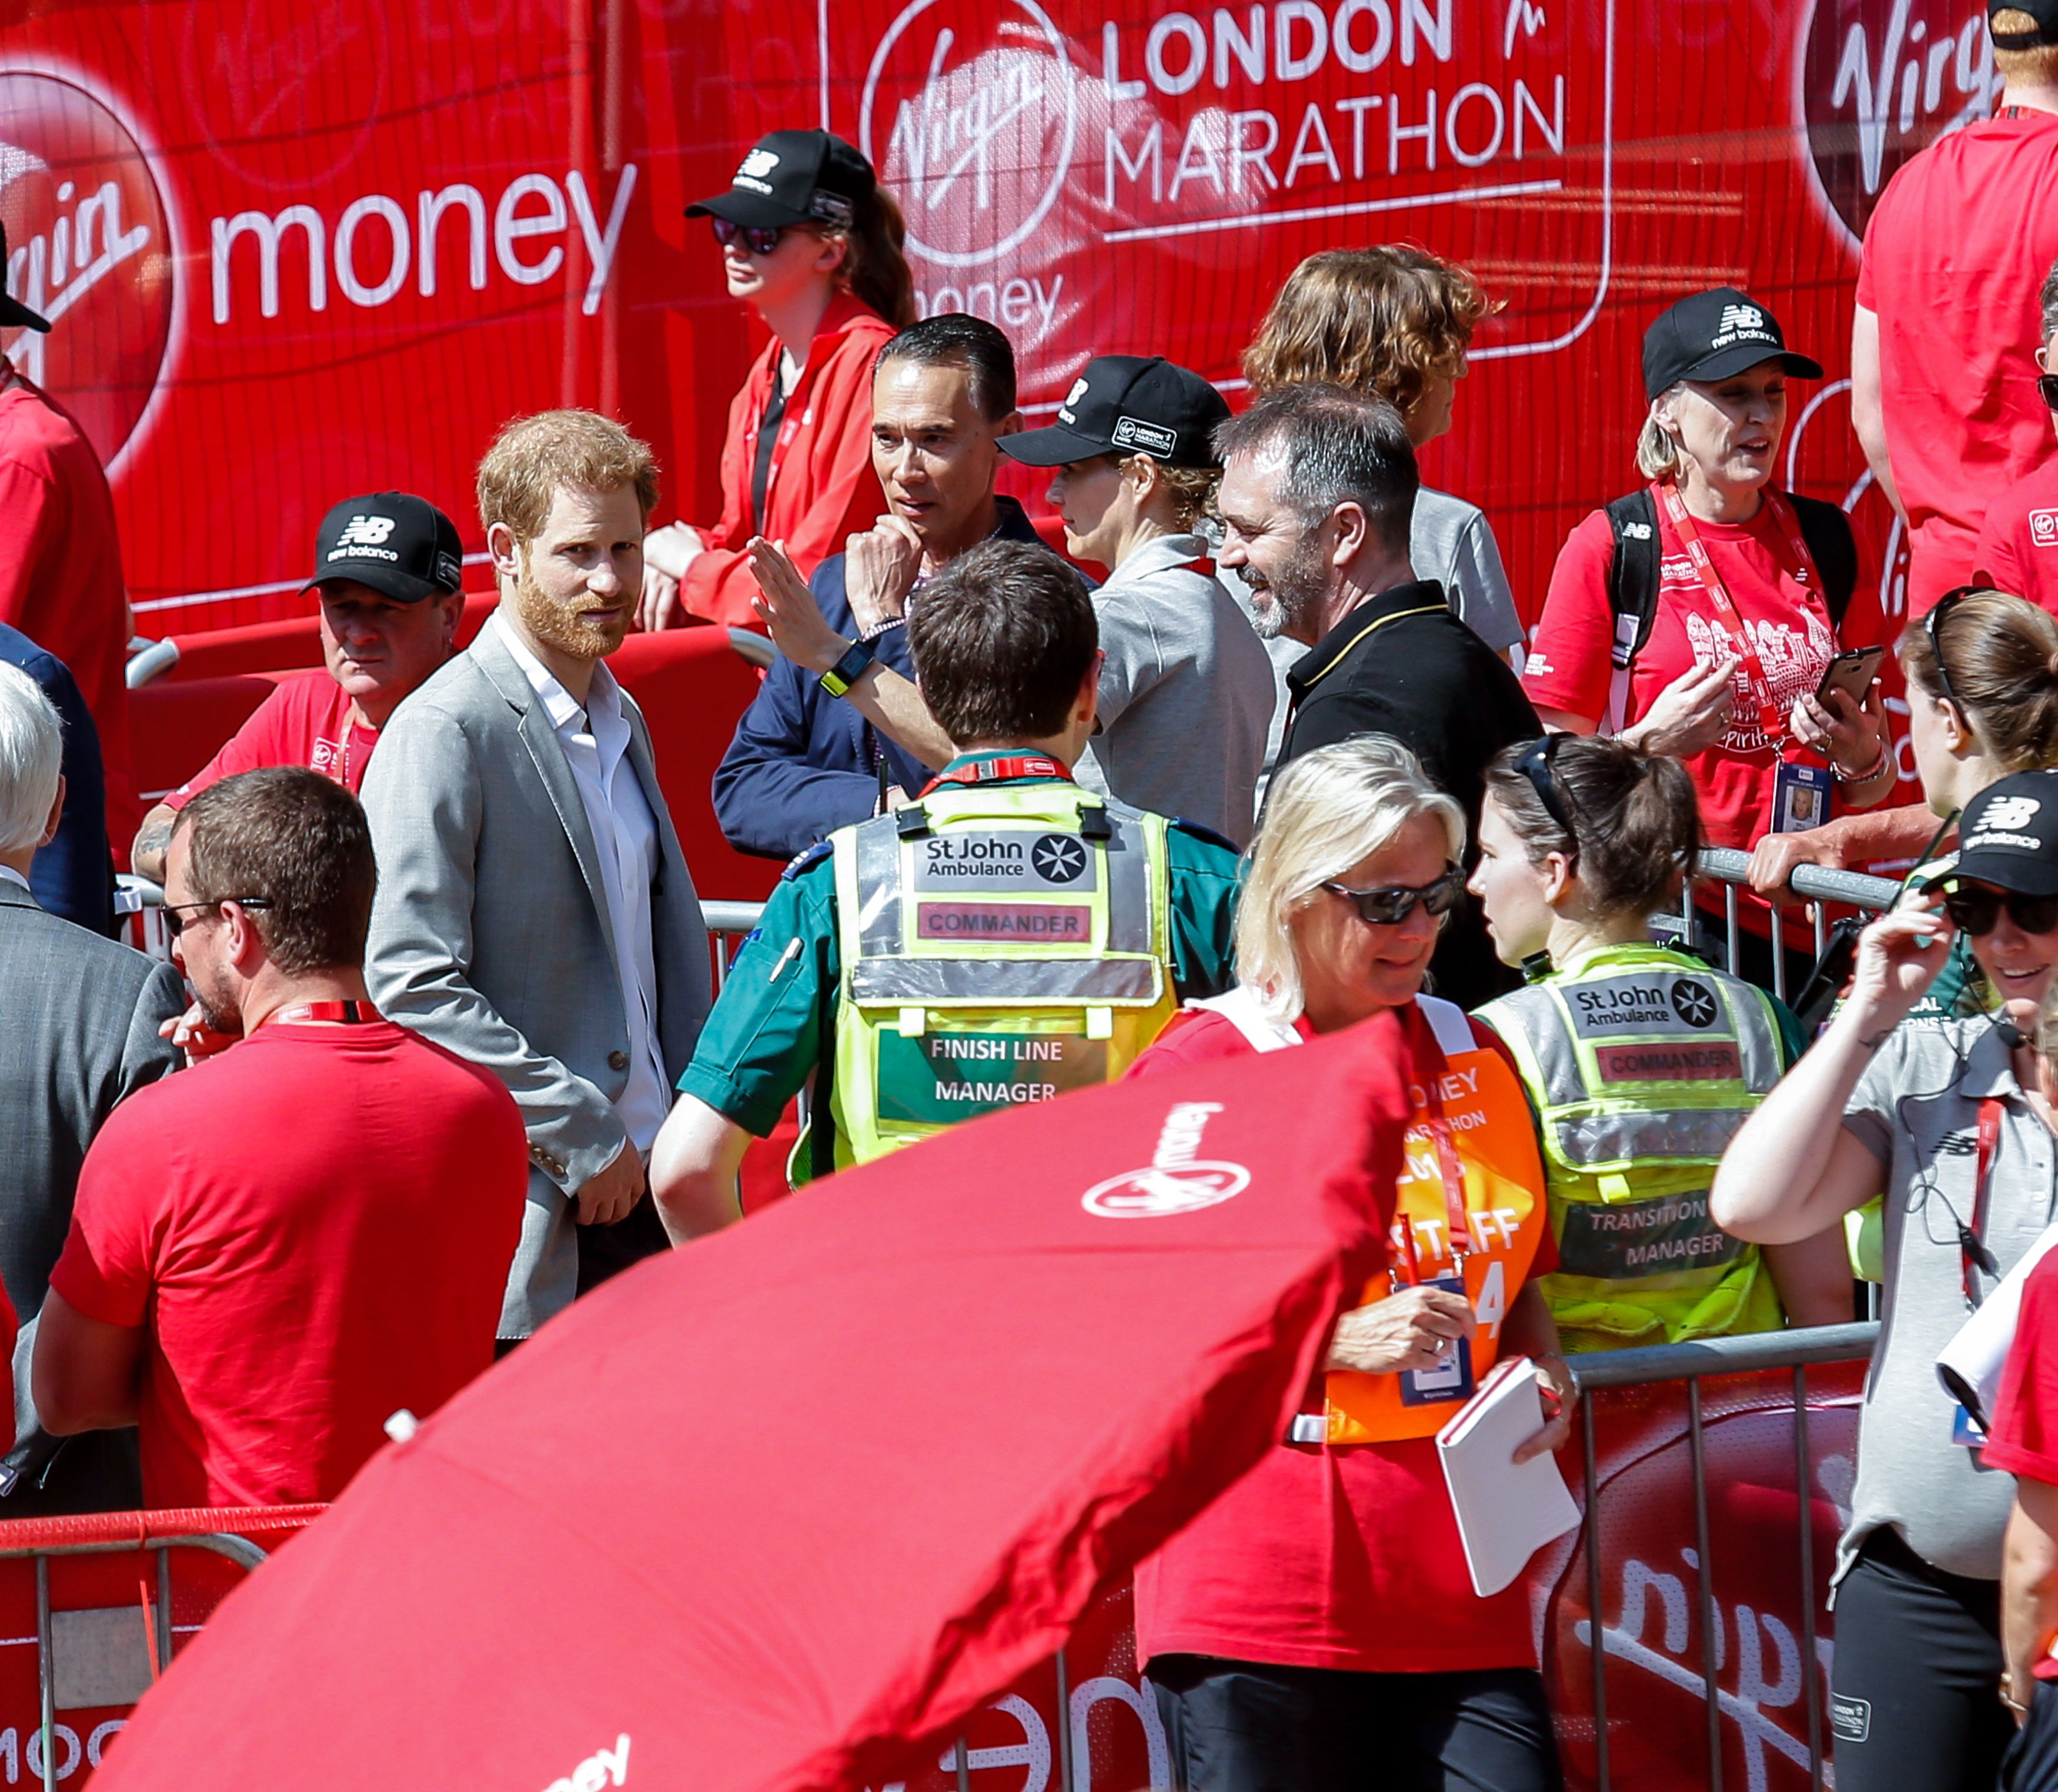 Prince Harry Makes A Surprise Appearance At The London Marathon Today - 